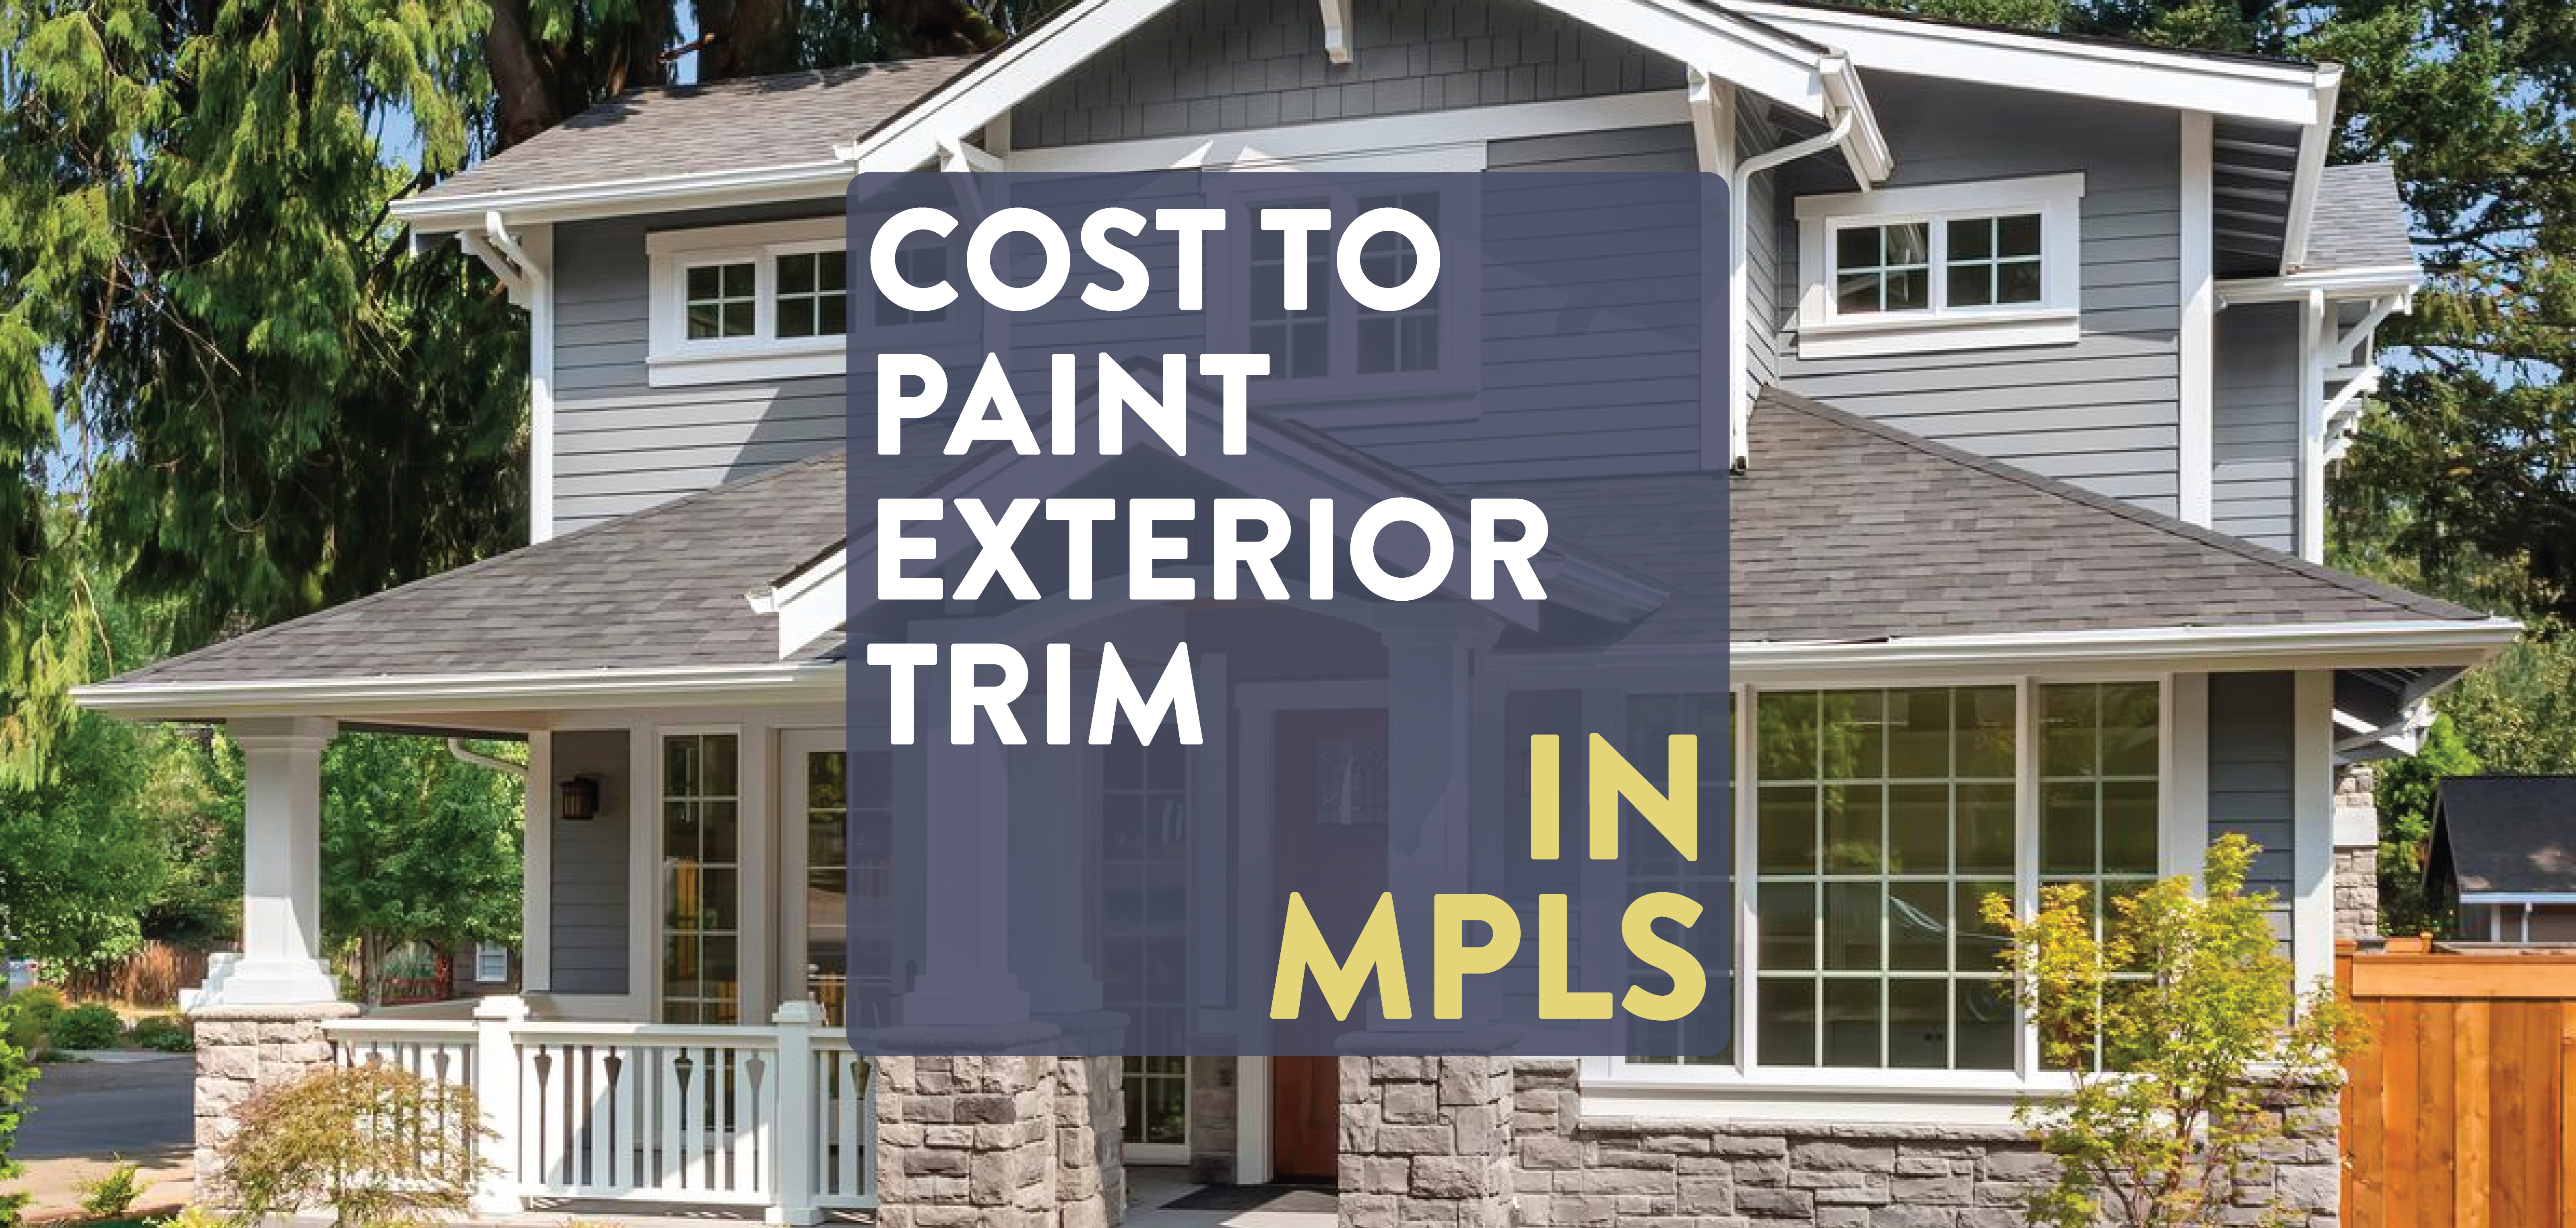 Cost of painting trim in mpls